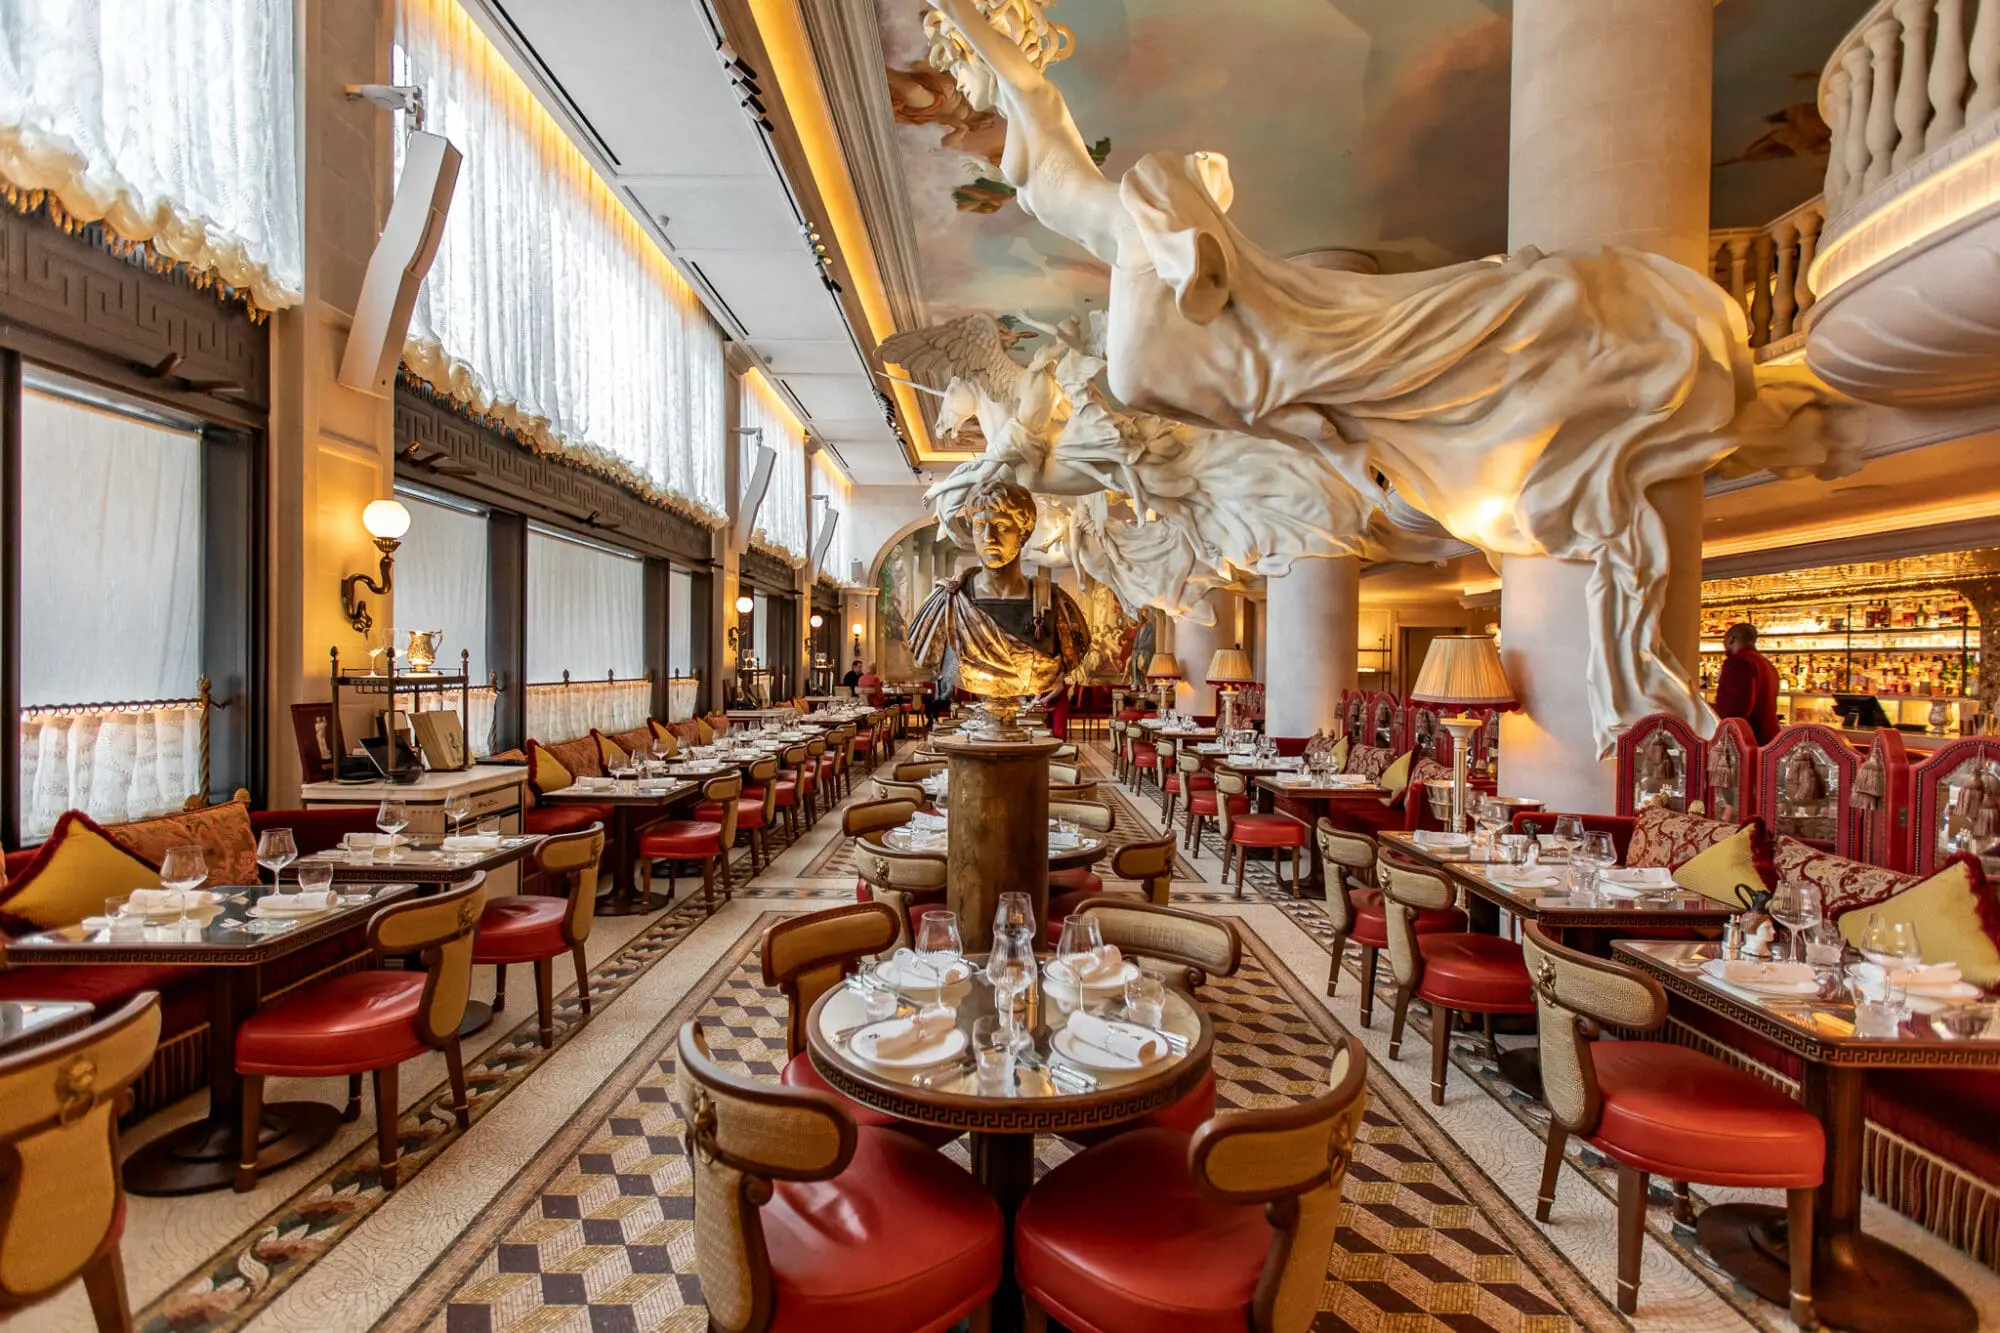 Bacchanalia Restaurant in London. Large, impending sculptures and Roman statues loom large over the dining room.